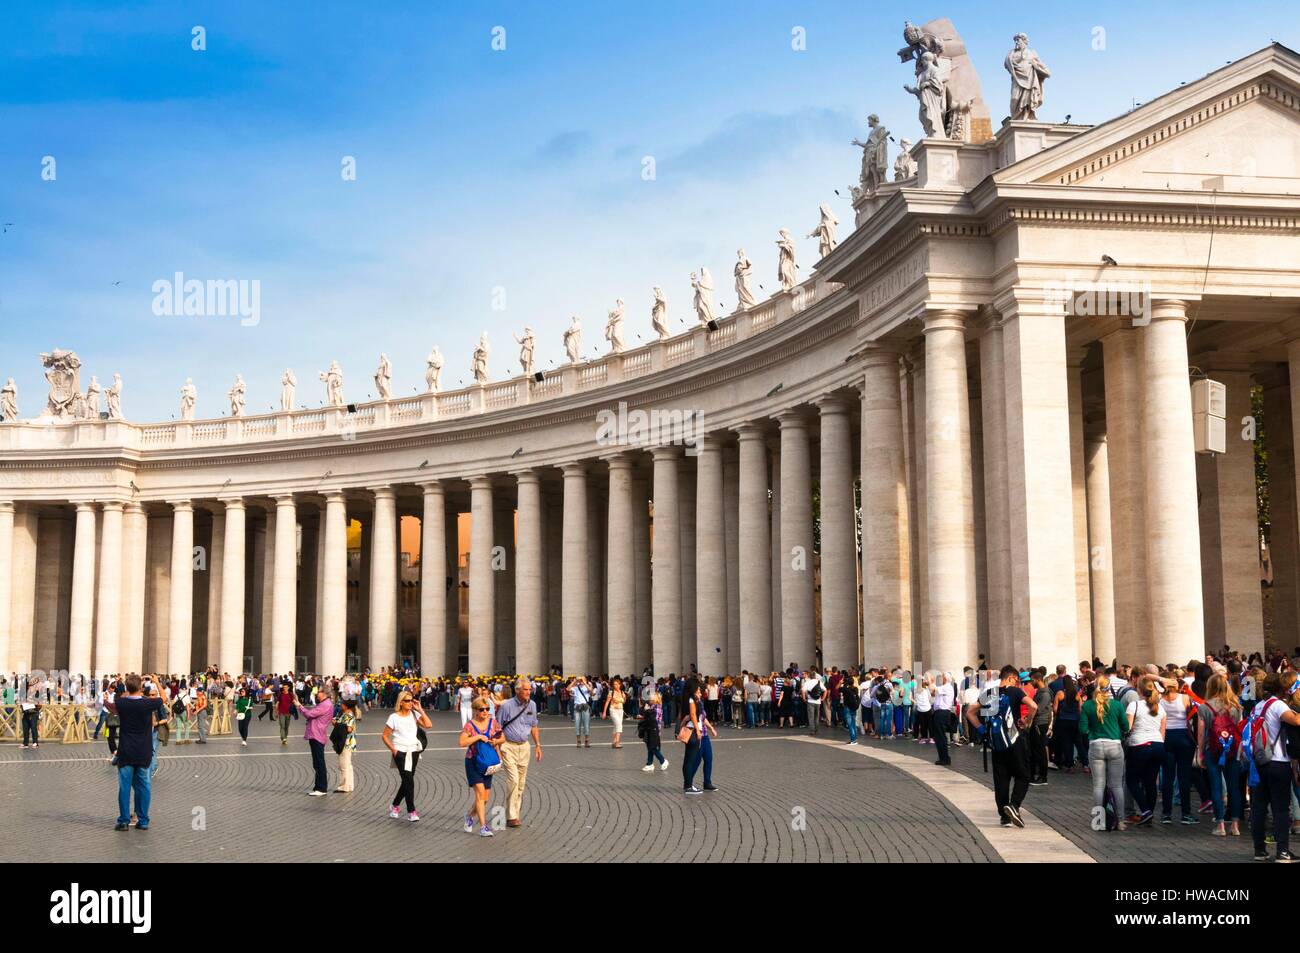 Italy, Latium, Rome, Vatican City, listed as World Heritage by UNESCO, Statues of saints, Bernini's colonnade, Piazza San Pietro, St. Peter's square, Stock Photo